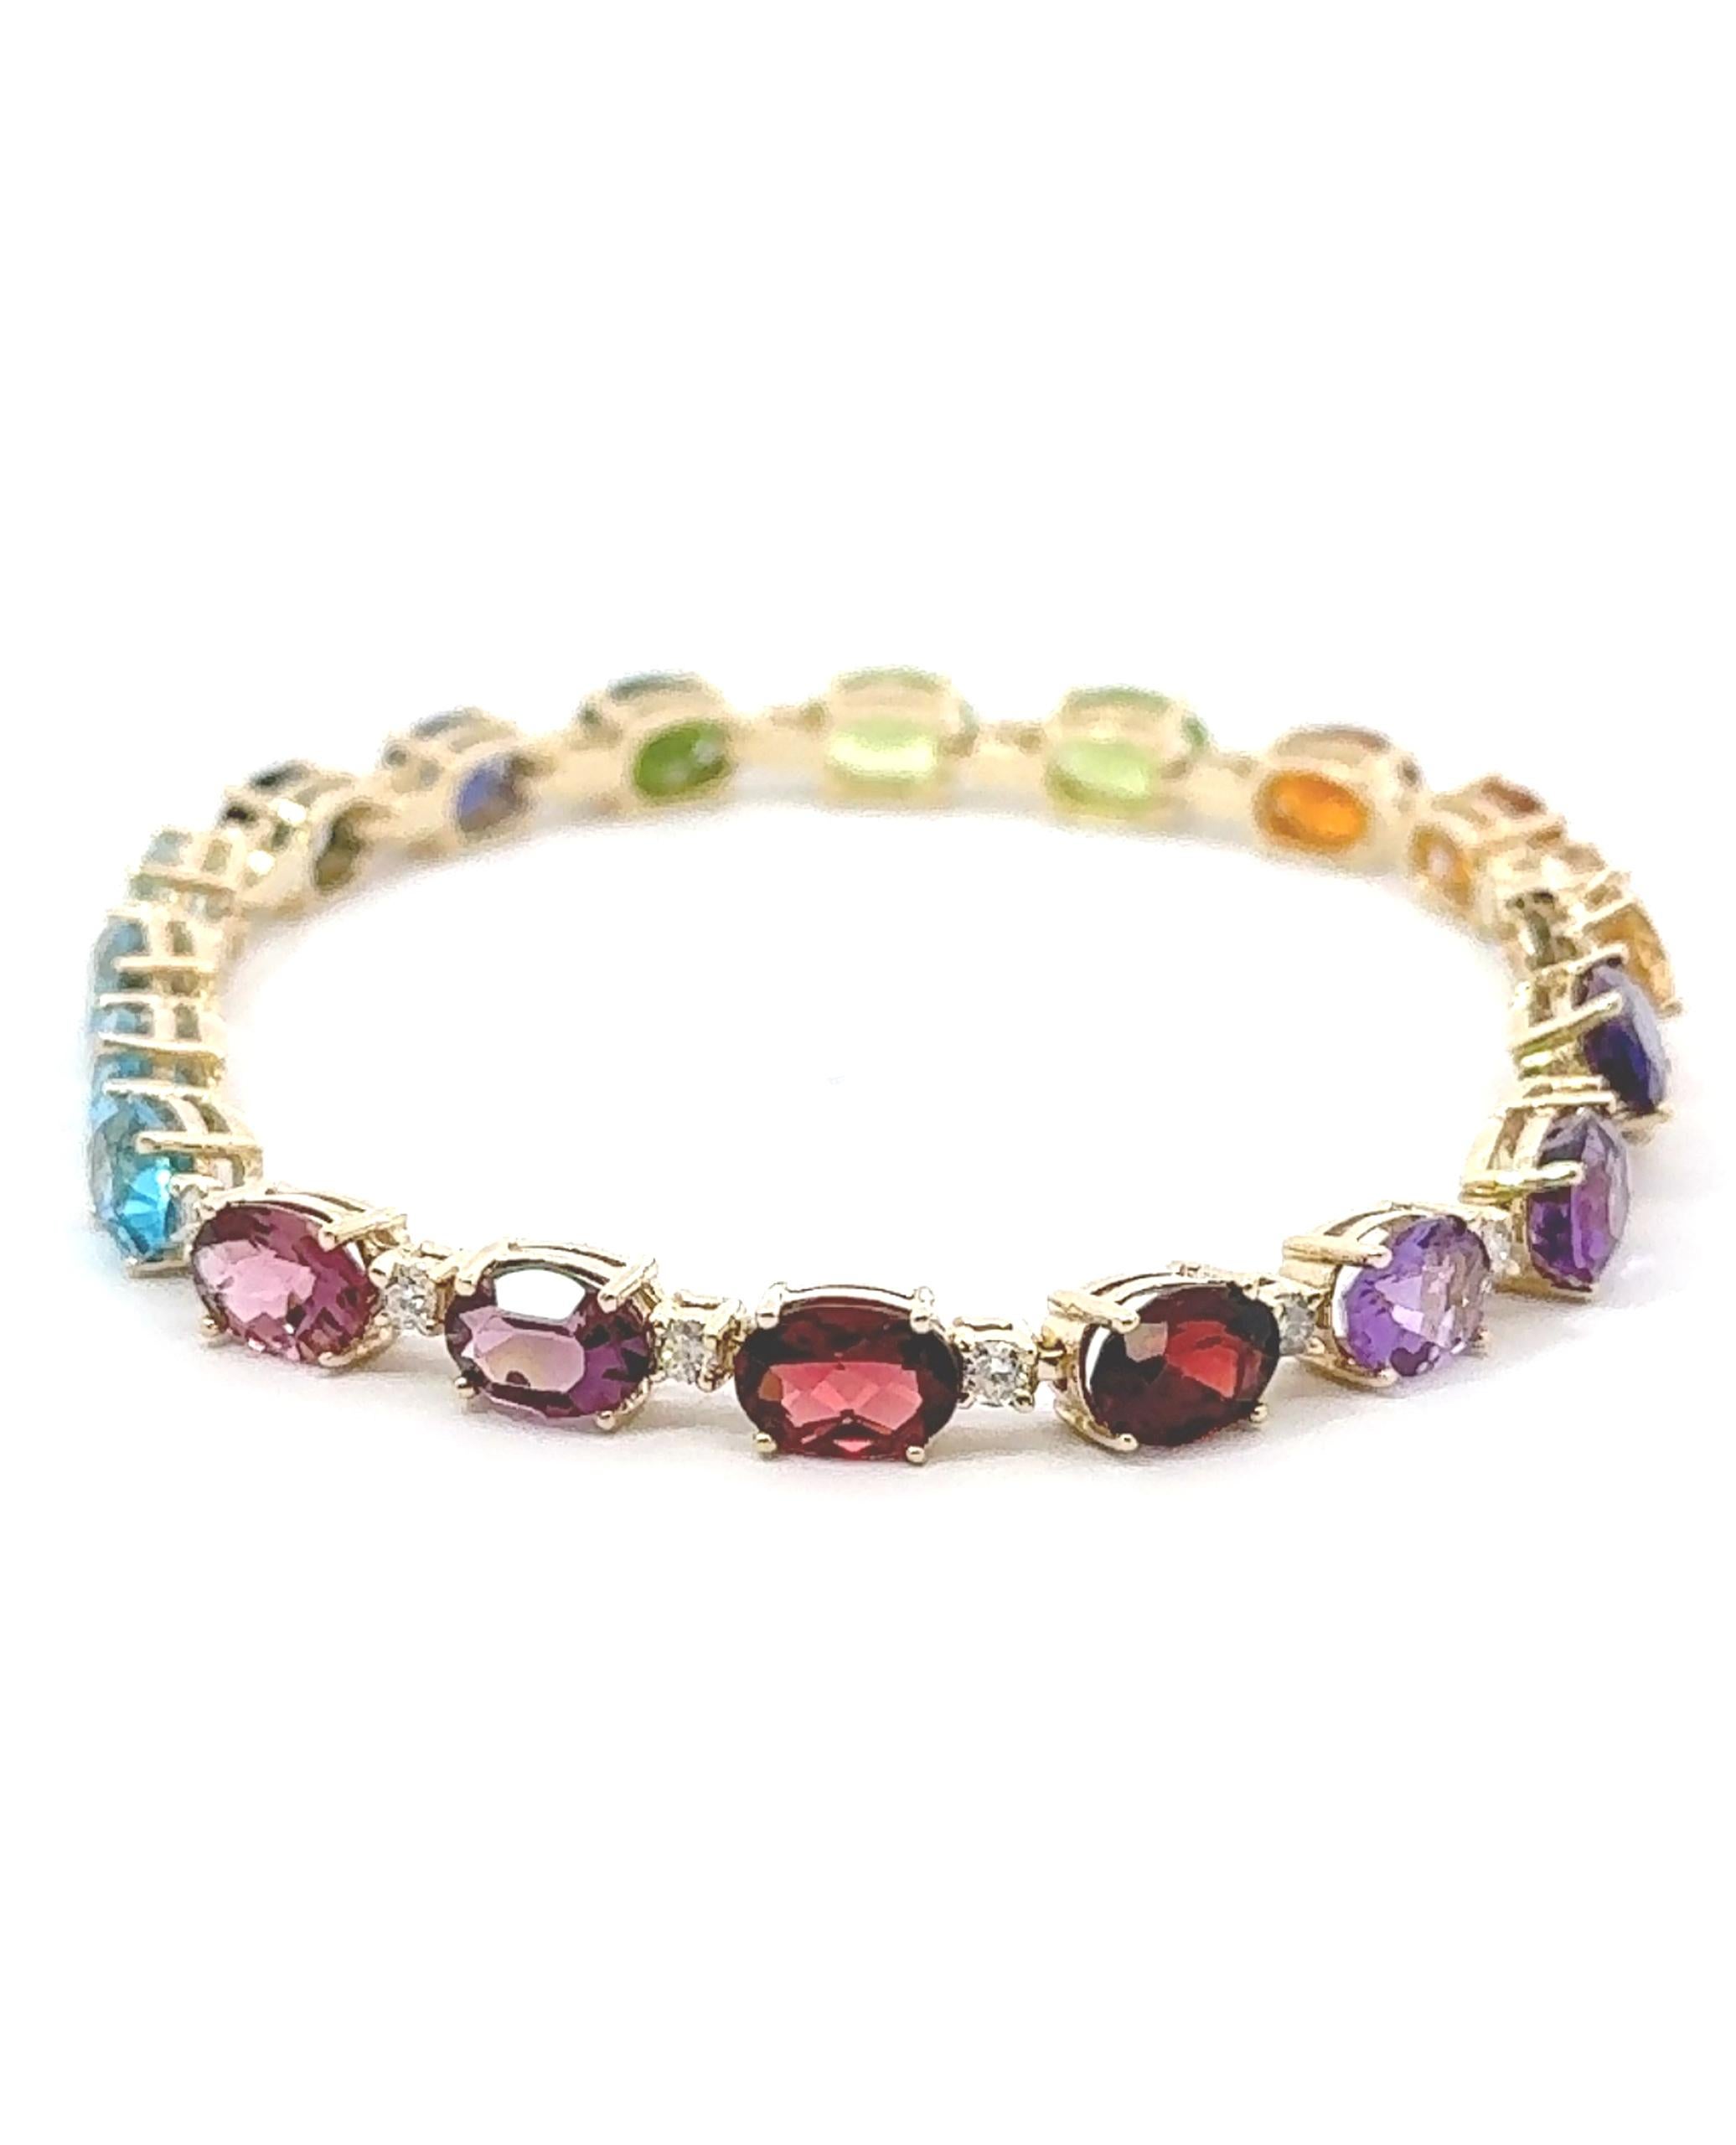 Contemporary 14K Yellow Gold Rainbow Bracelet with Semiprecious Stones For Sale